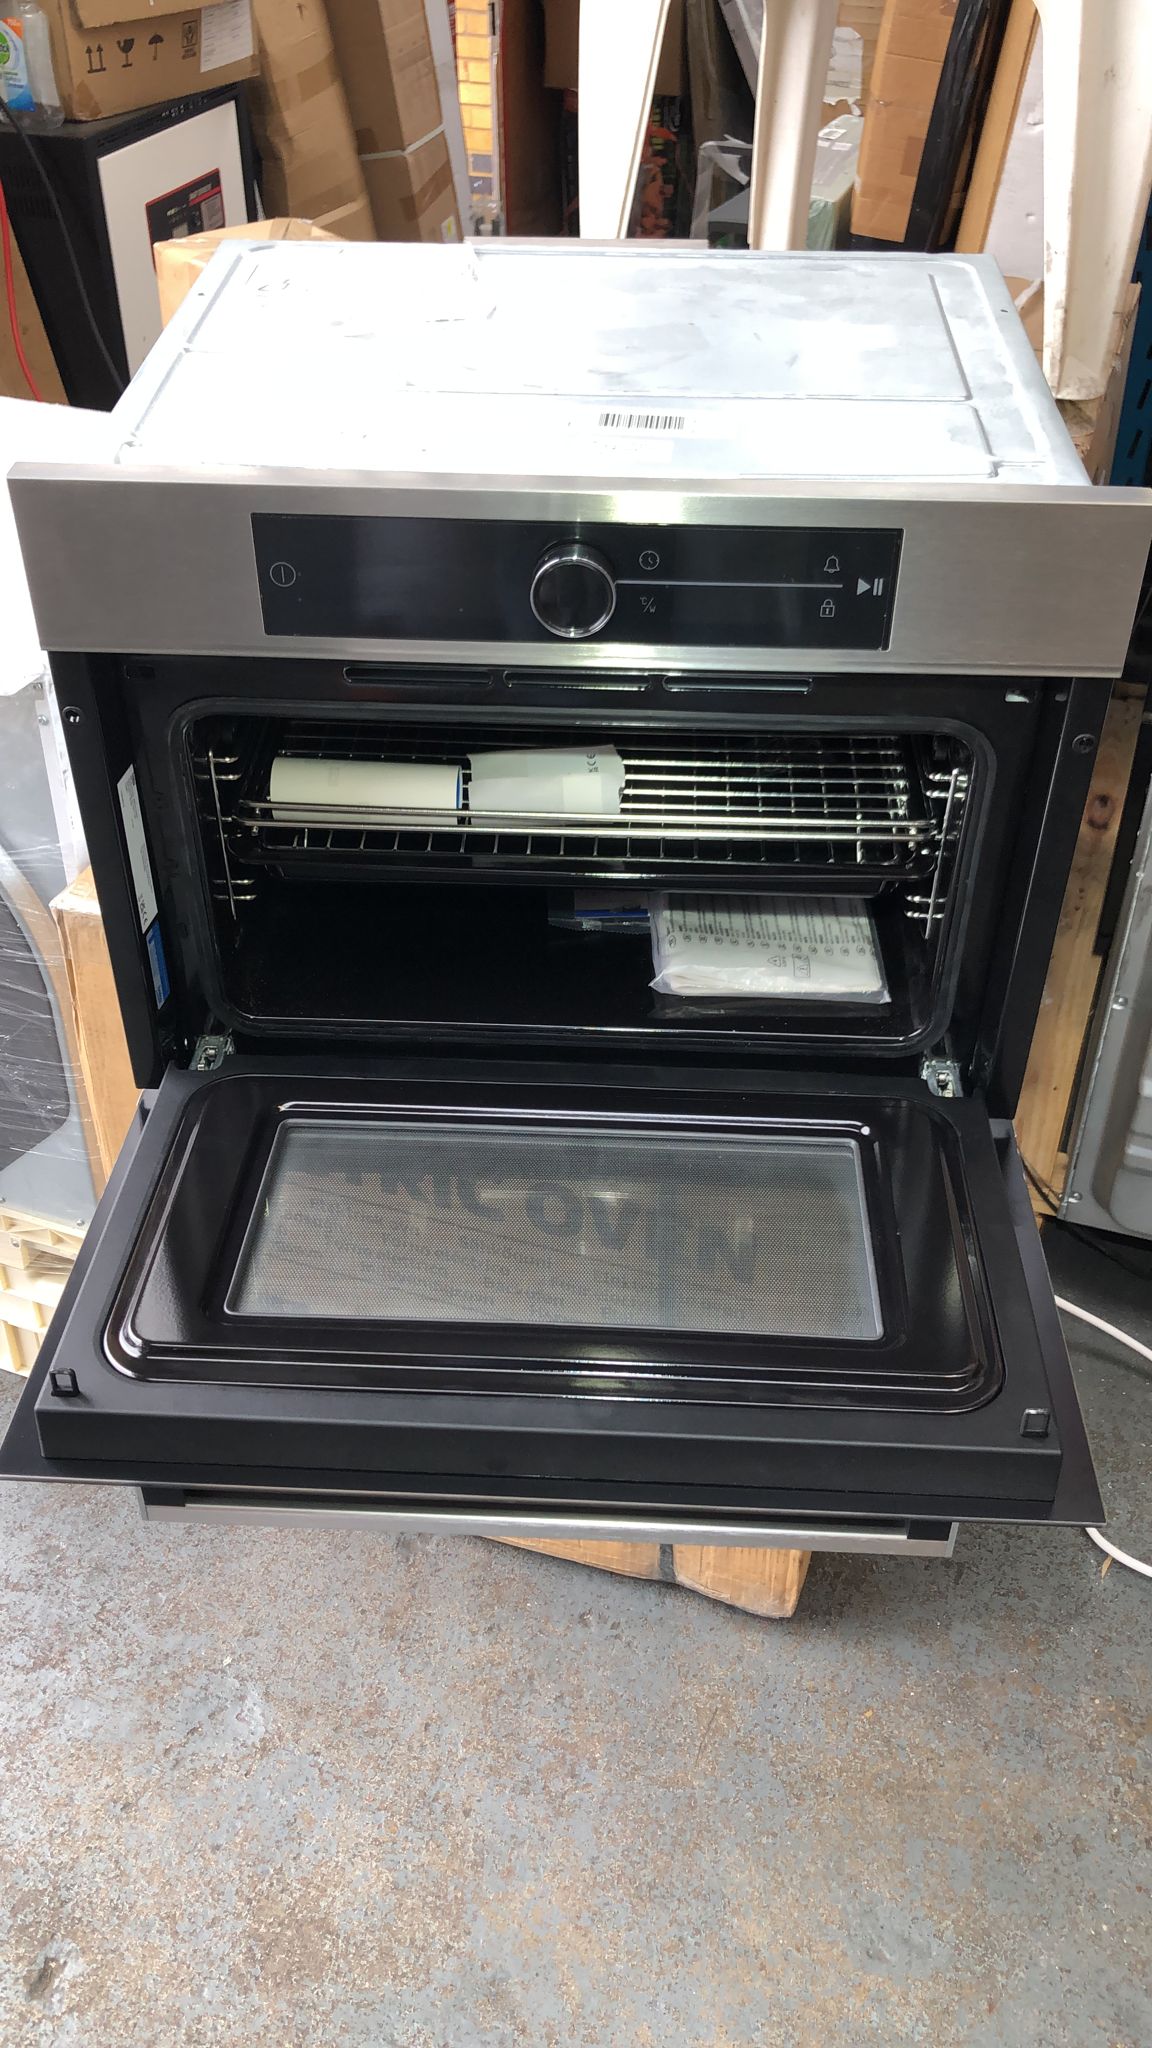 Beko-Oven with microwave-Stainless steel-Built-in- BBCW12400X-6488